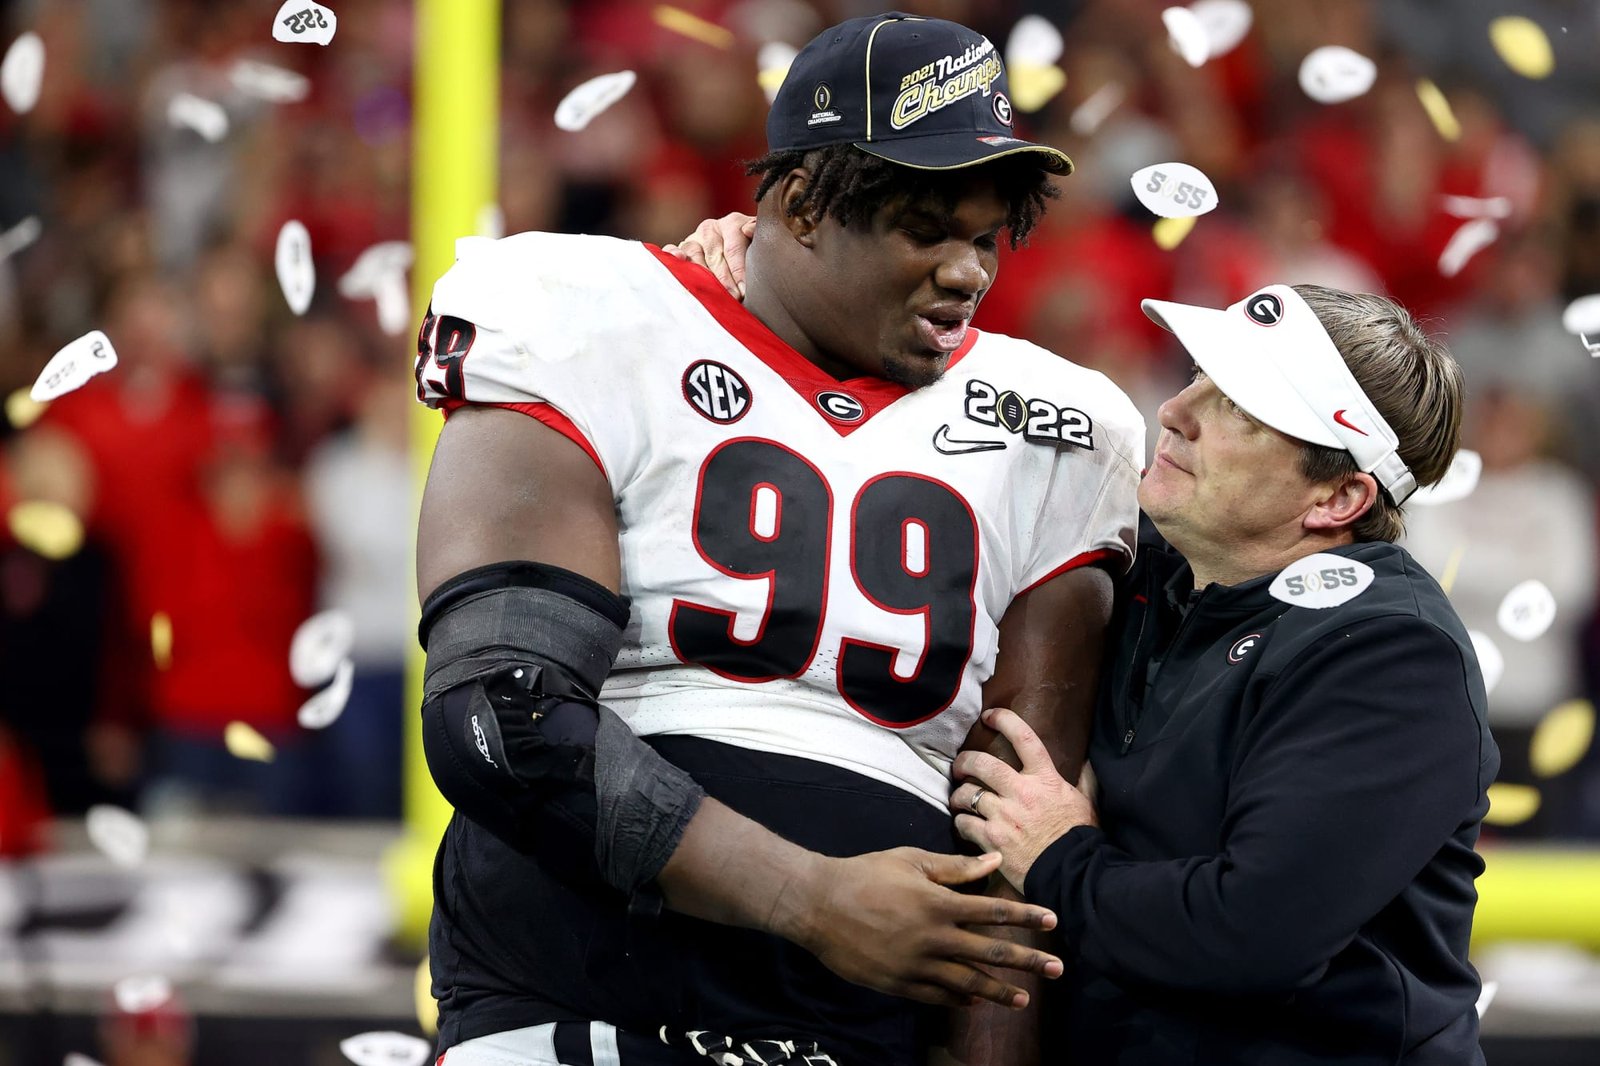 Georgia football breaks record for most players taken in a single NFL Draft